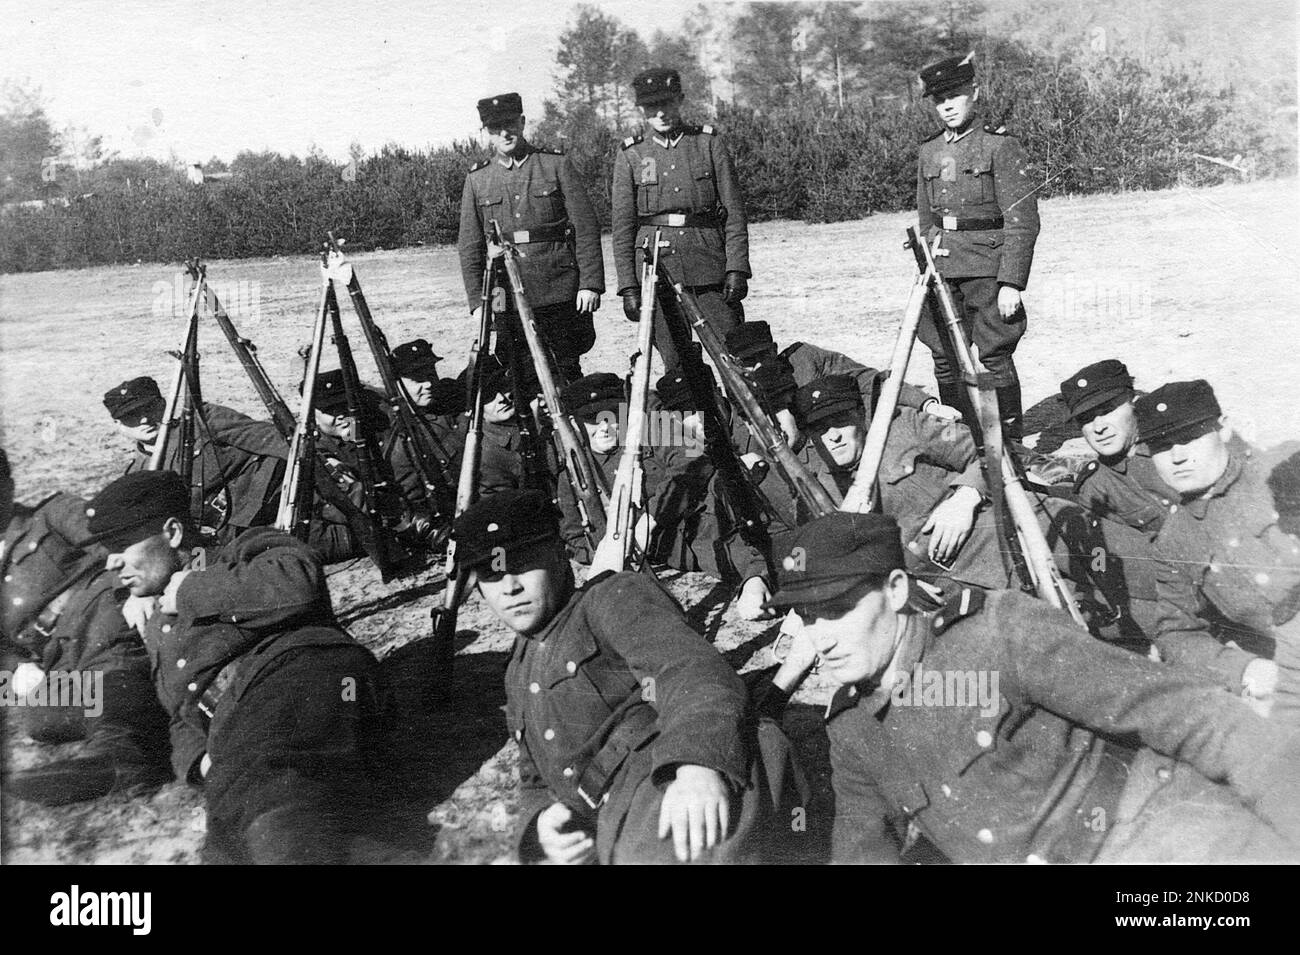 Picture of Trawniki guards at Sobibor, taken in 1943.  Trawniki men were Central and Eastern European Nazi collaborators, consisting of either volunteers or recruits from prisoner-of-war camps. Stock Photo